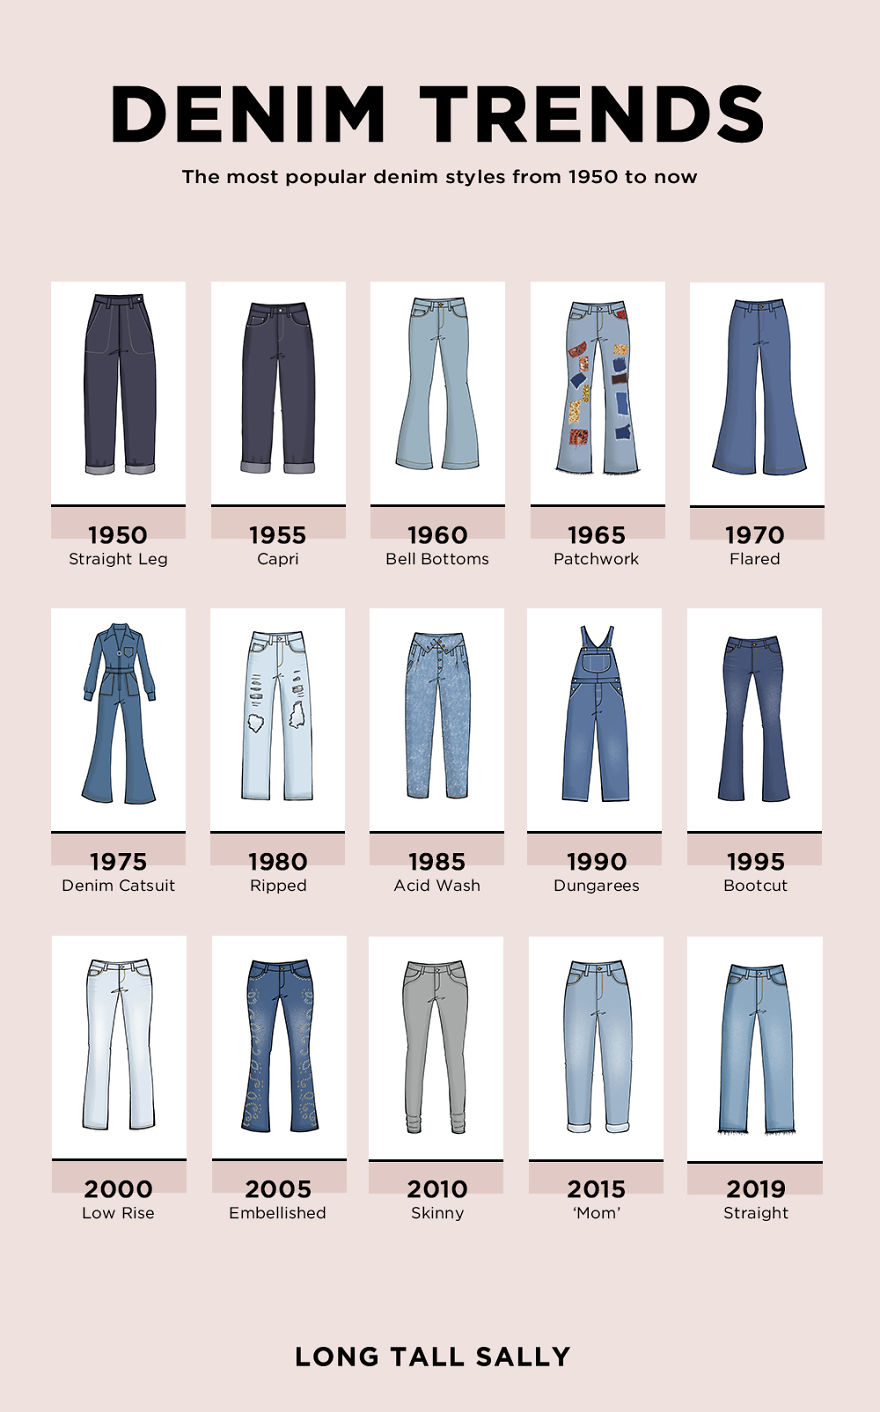 The Most Popular Denim Styles From 1950 To 2019